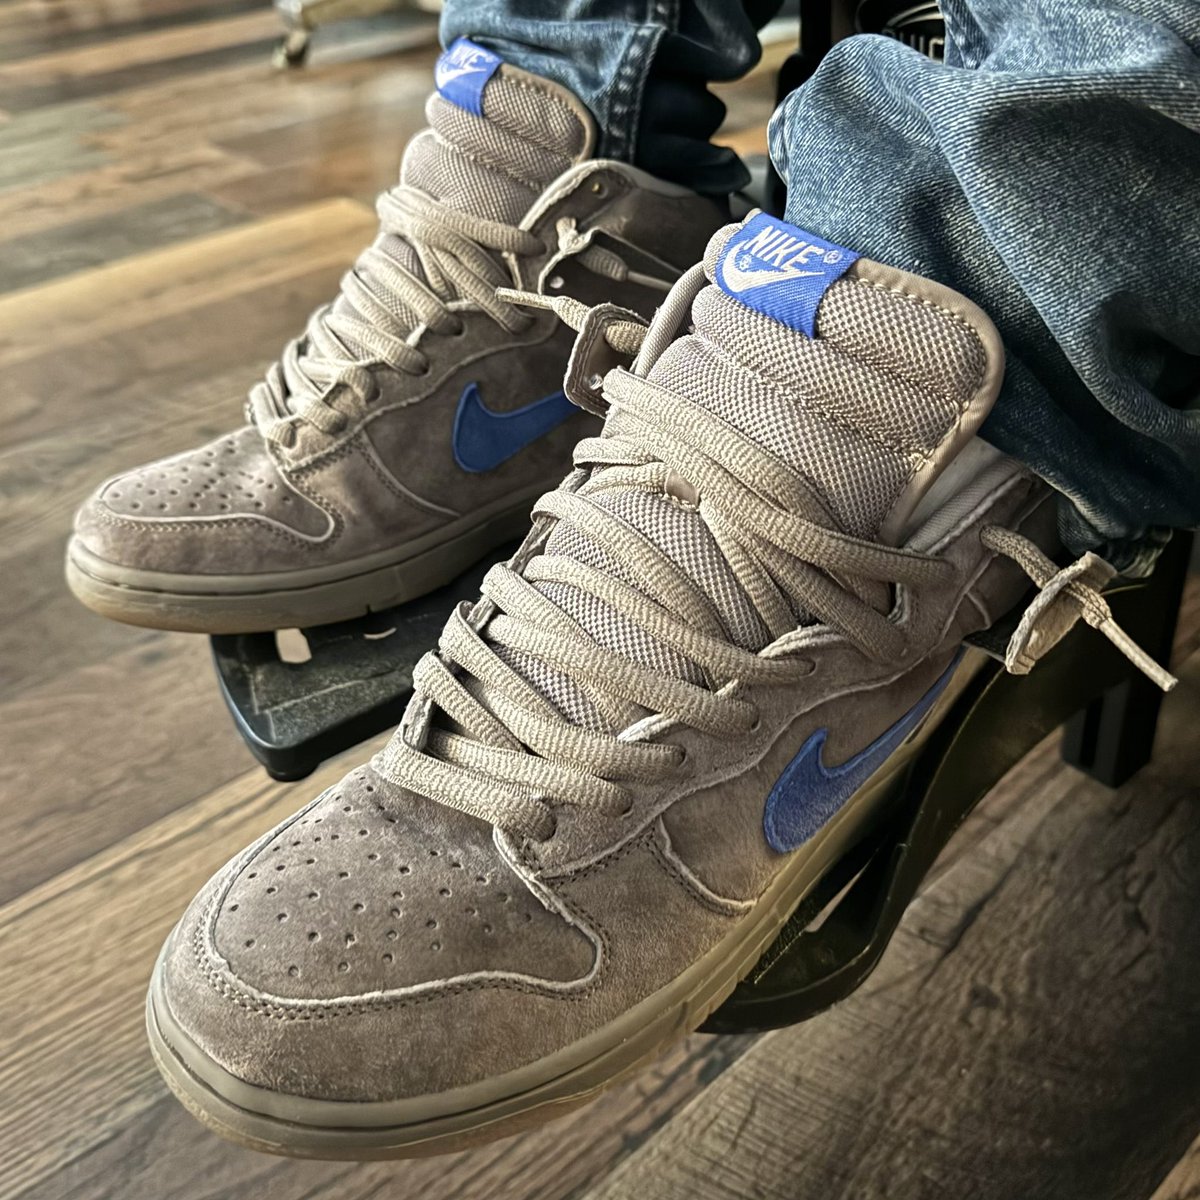 Decided to rock my 2003 Iron Dunk SB Highs. With an all suede upper, these are one of the best quality SBs EVER!!! Colors inspired by the Detroit Lions, and who doesn’t love a gum bottom! #snkrsliveheatingup #snkrskickcheck #yoursneakersaredope #kotd #wdywt #photography #NikeSB